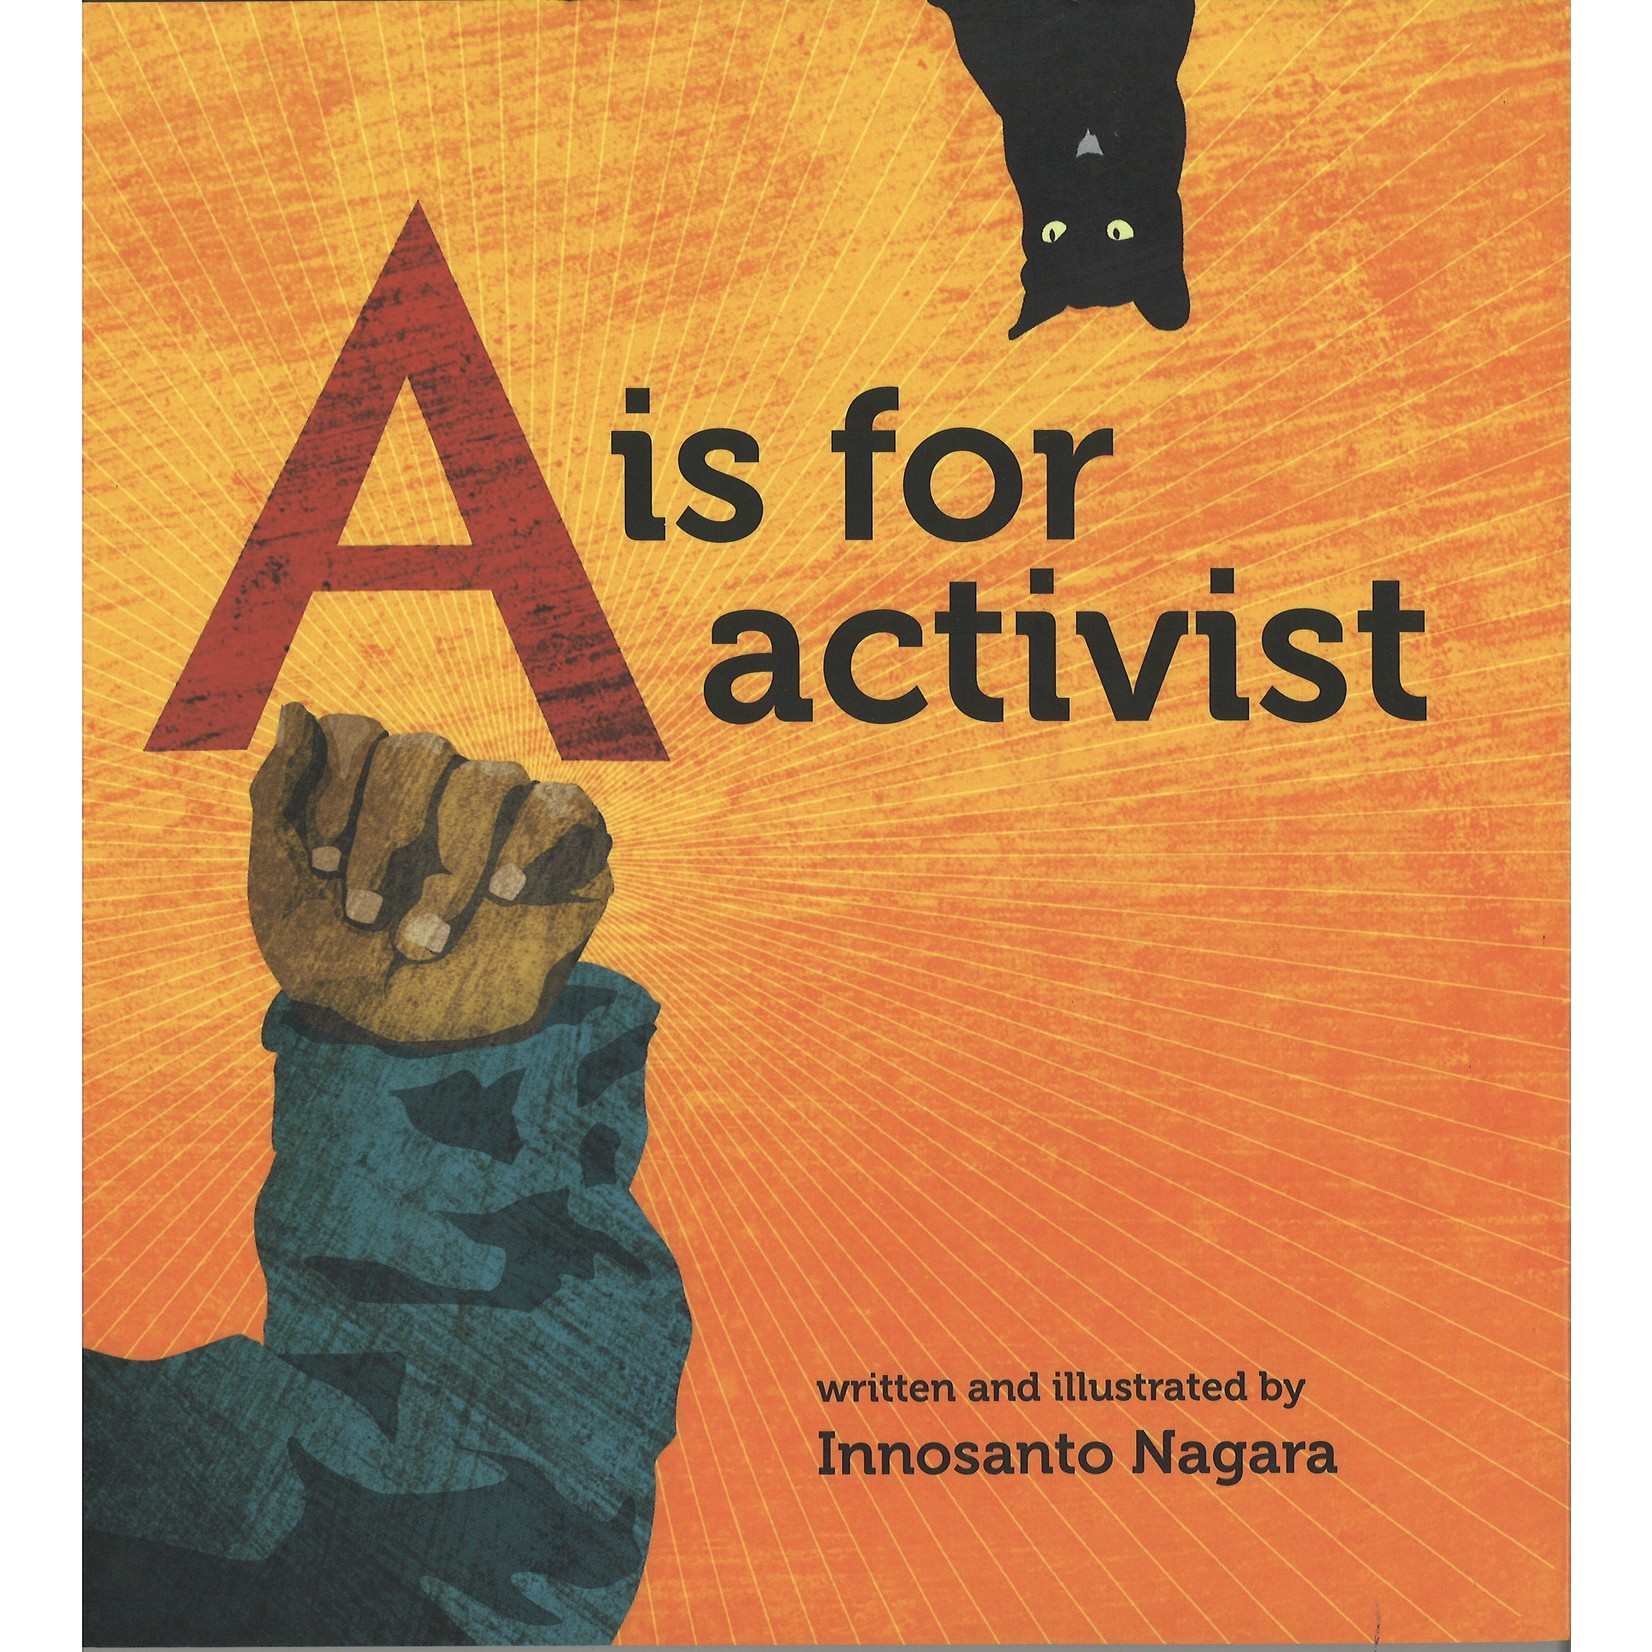 A IS FOR ACTIVIST